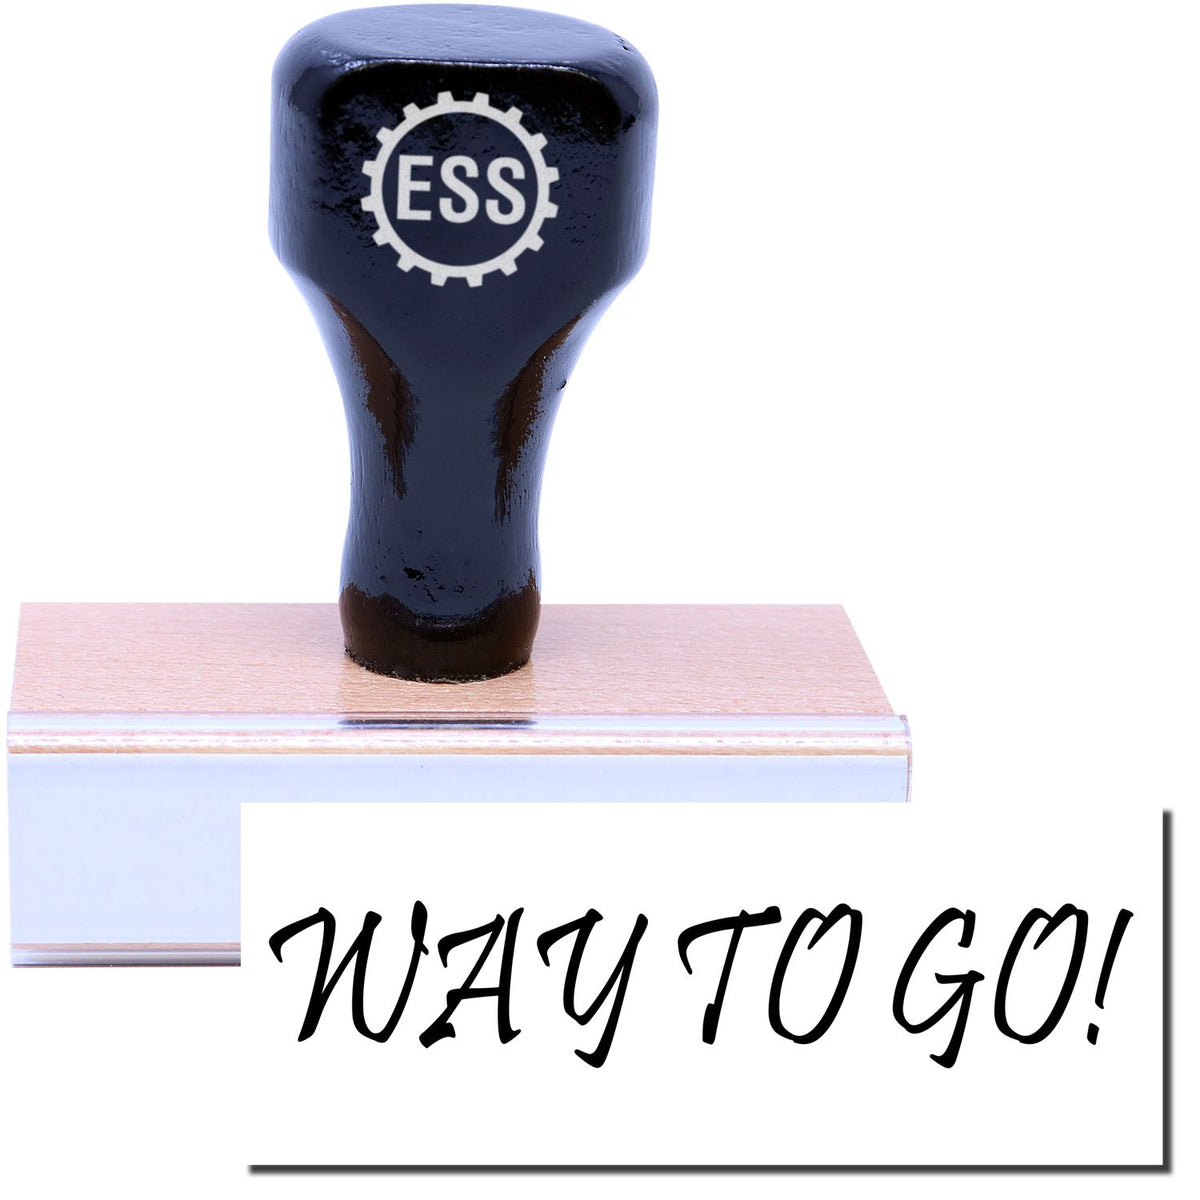 A stock office rubber stamp with a stamped image showing how the text &quot;WAY TO GO!&quot; is displayed after stamping.